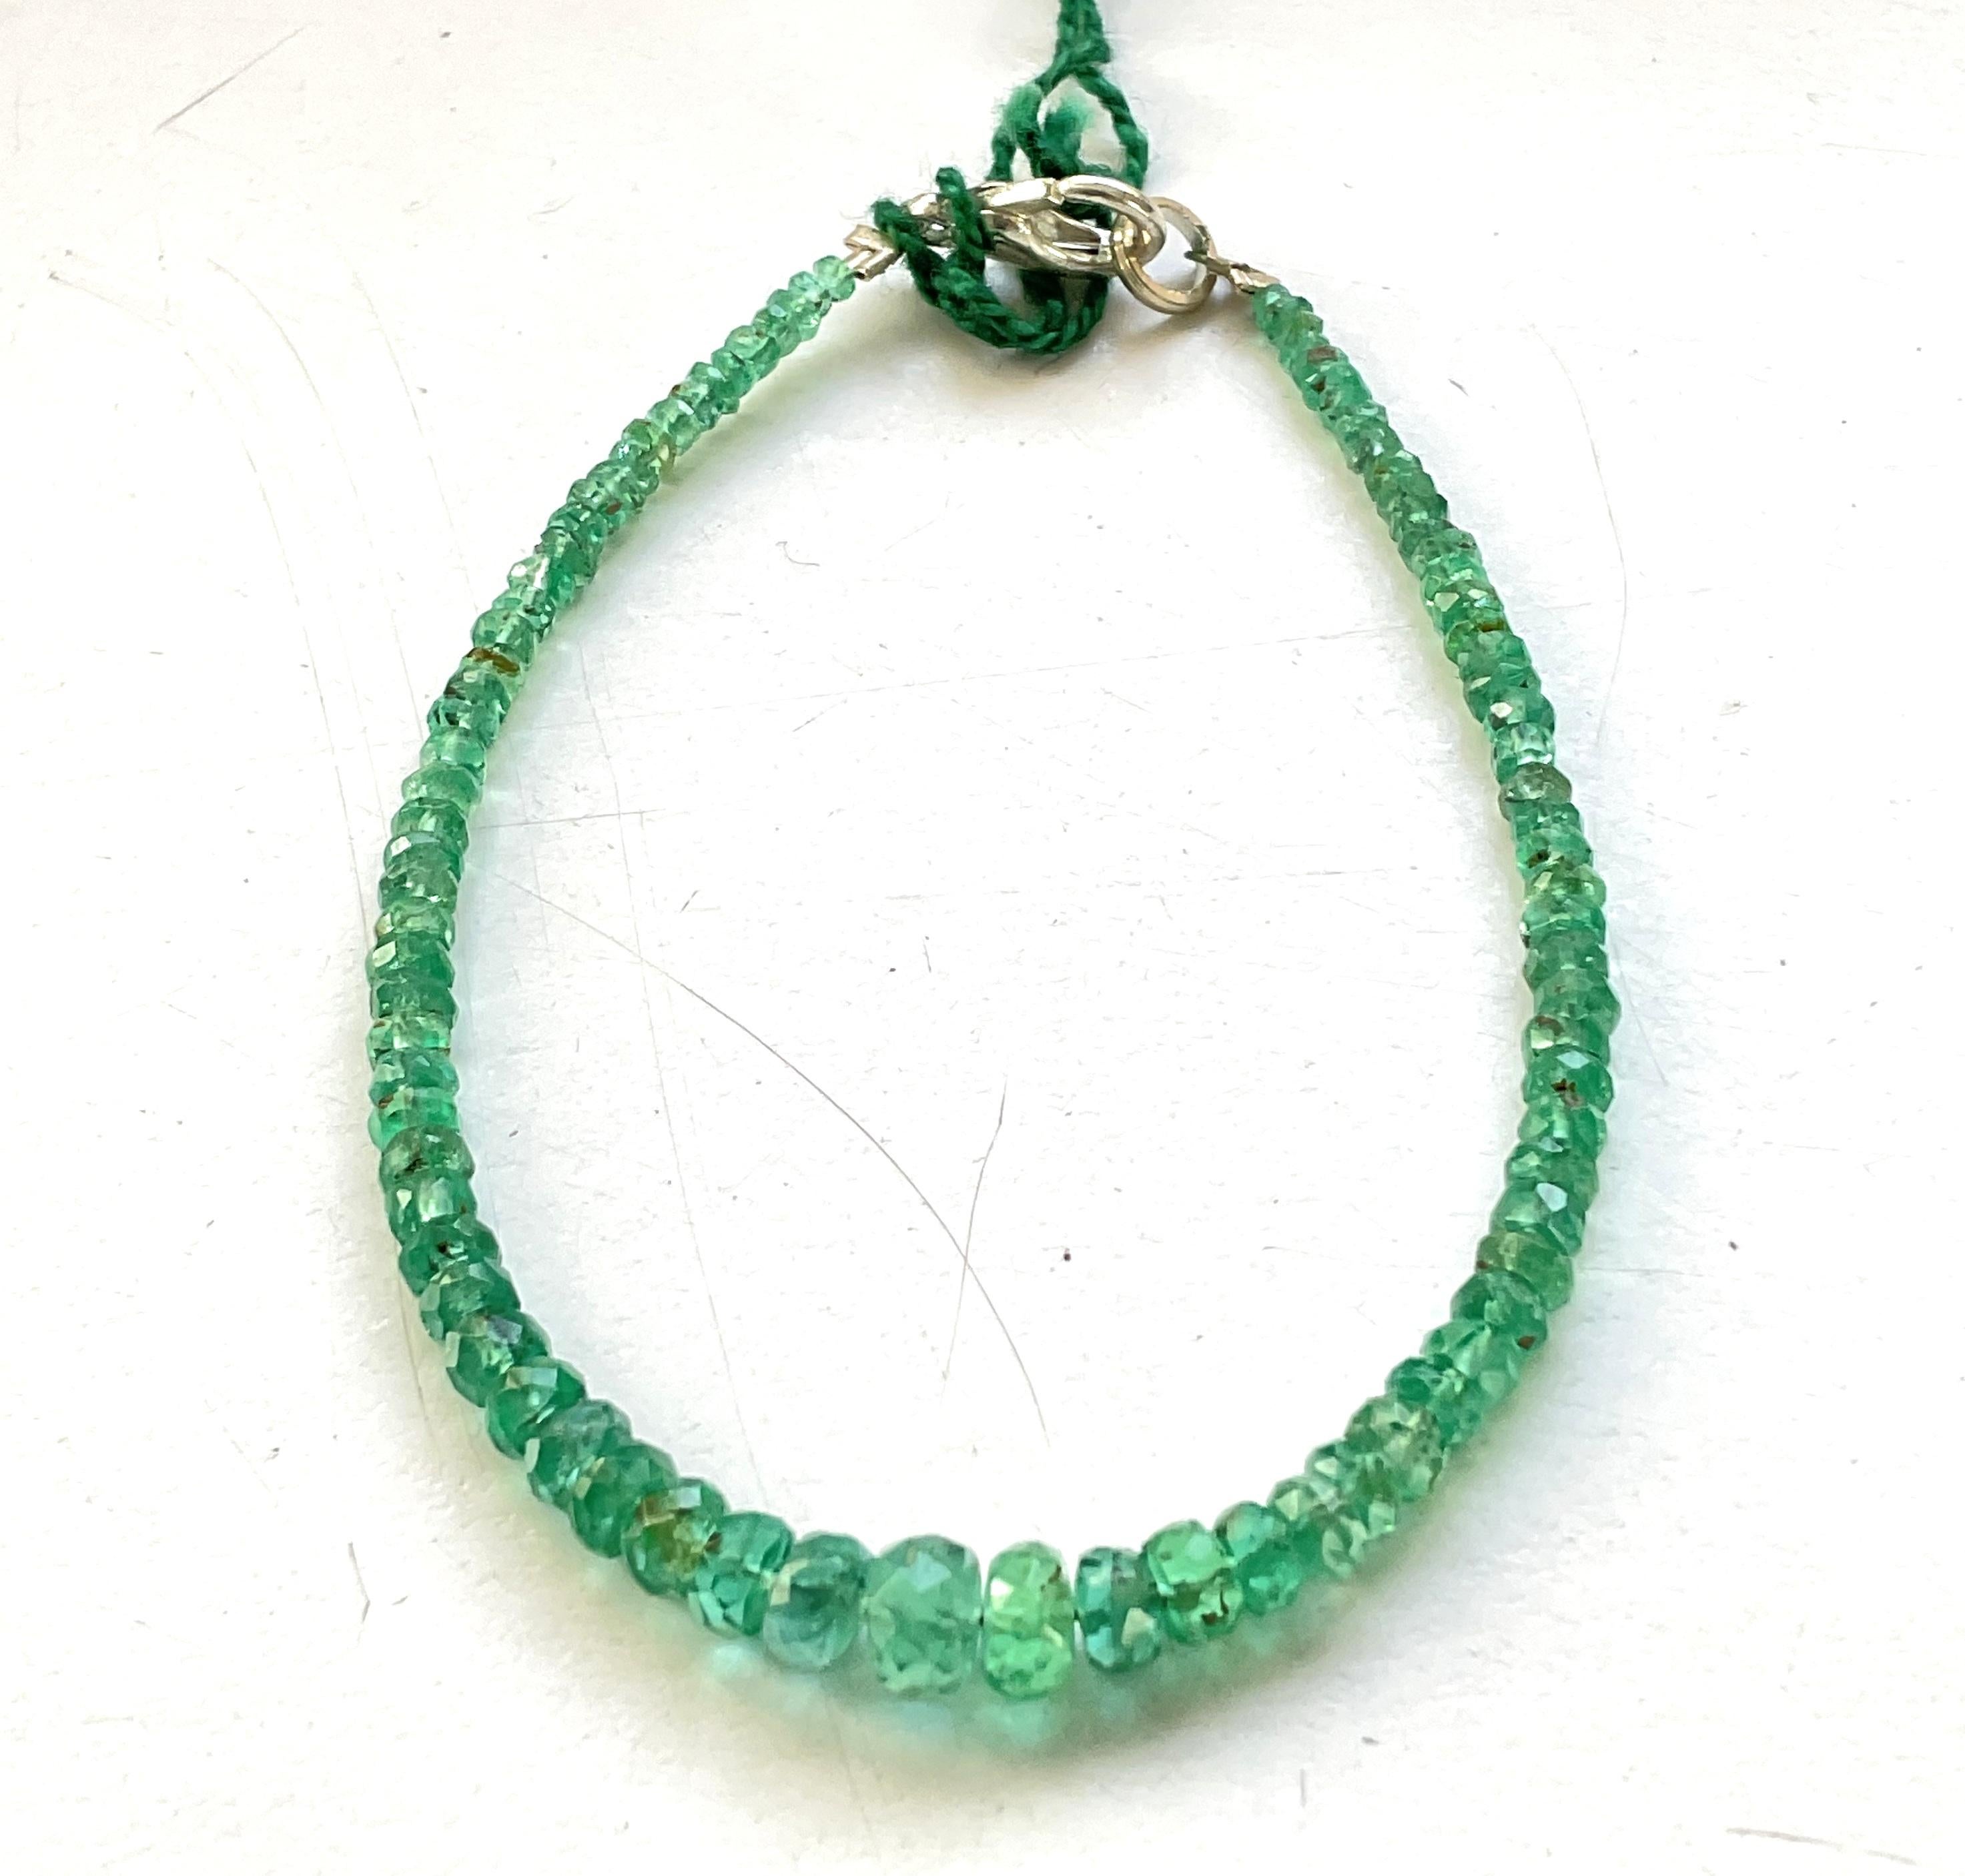 19.75 Carats Panjshir Emerald Faceted Beads Bracelets Jewelry Natural Gemstone In New Condition For Sale In Jaipur, RJ